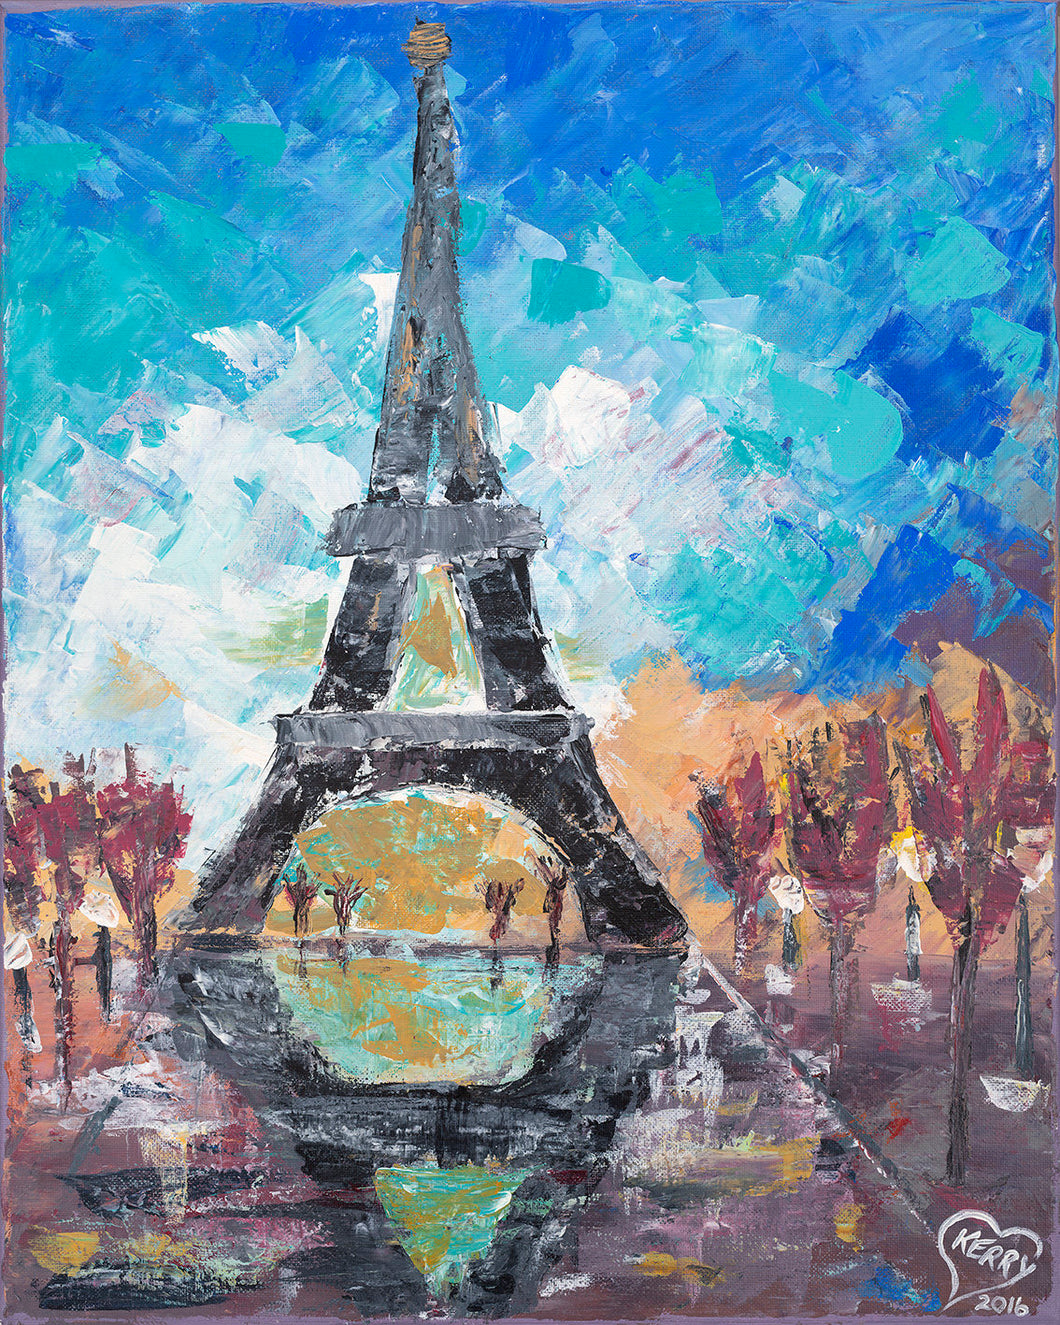 Original impressionistic painting of the Eiffel Tower and it's reflection in water